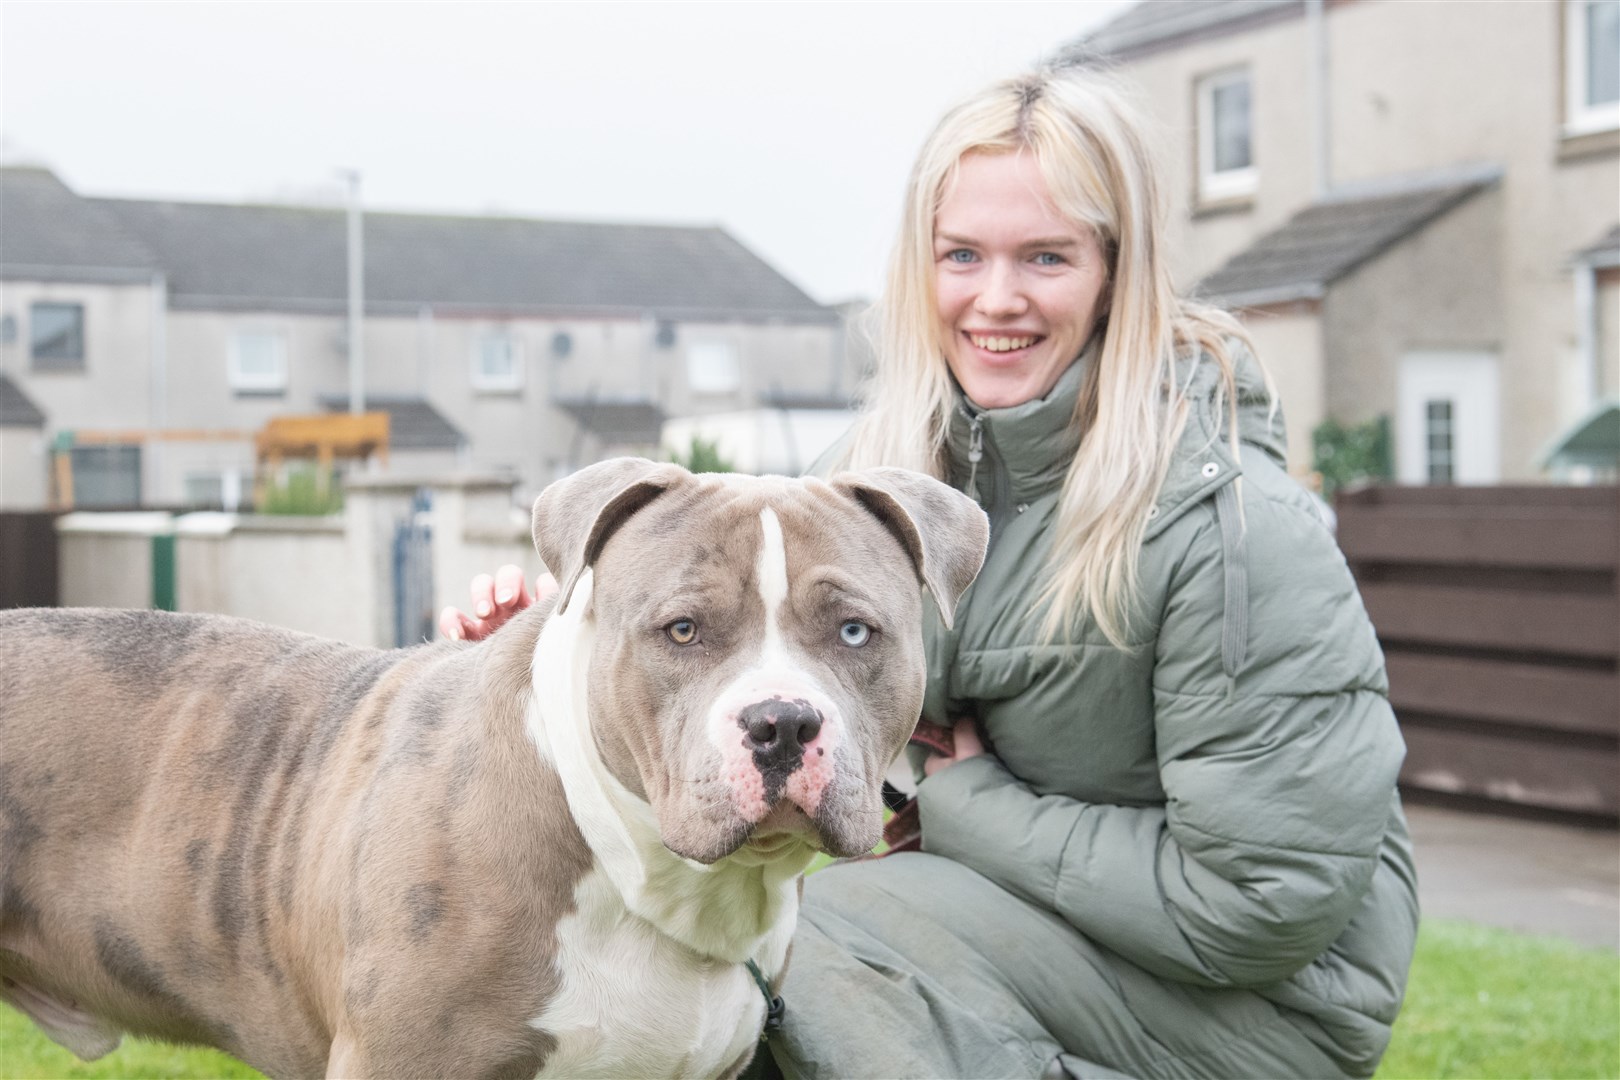 Taylor Stirling, from Keith, has been rehoming XL Bully dogs, including her new dog Enzo, following new restrictions introduced in England and Wales. Picture: Daniel Forsyth